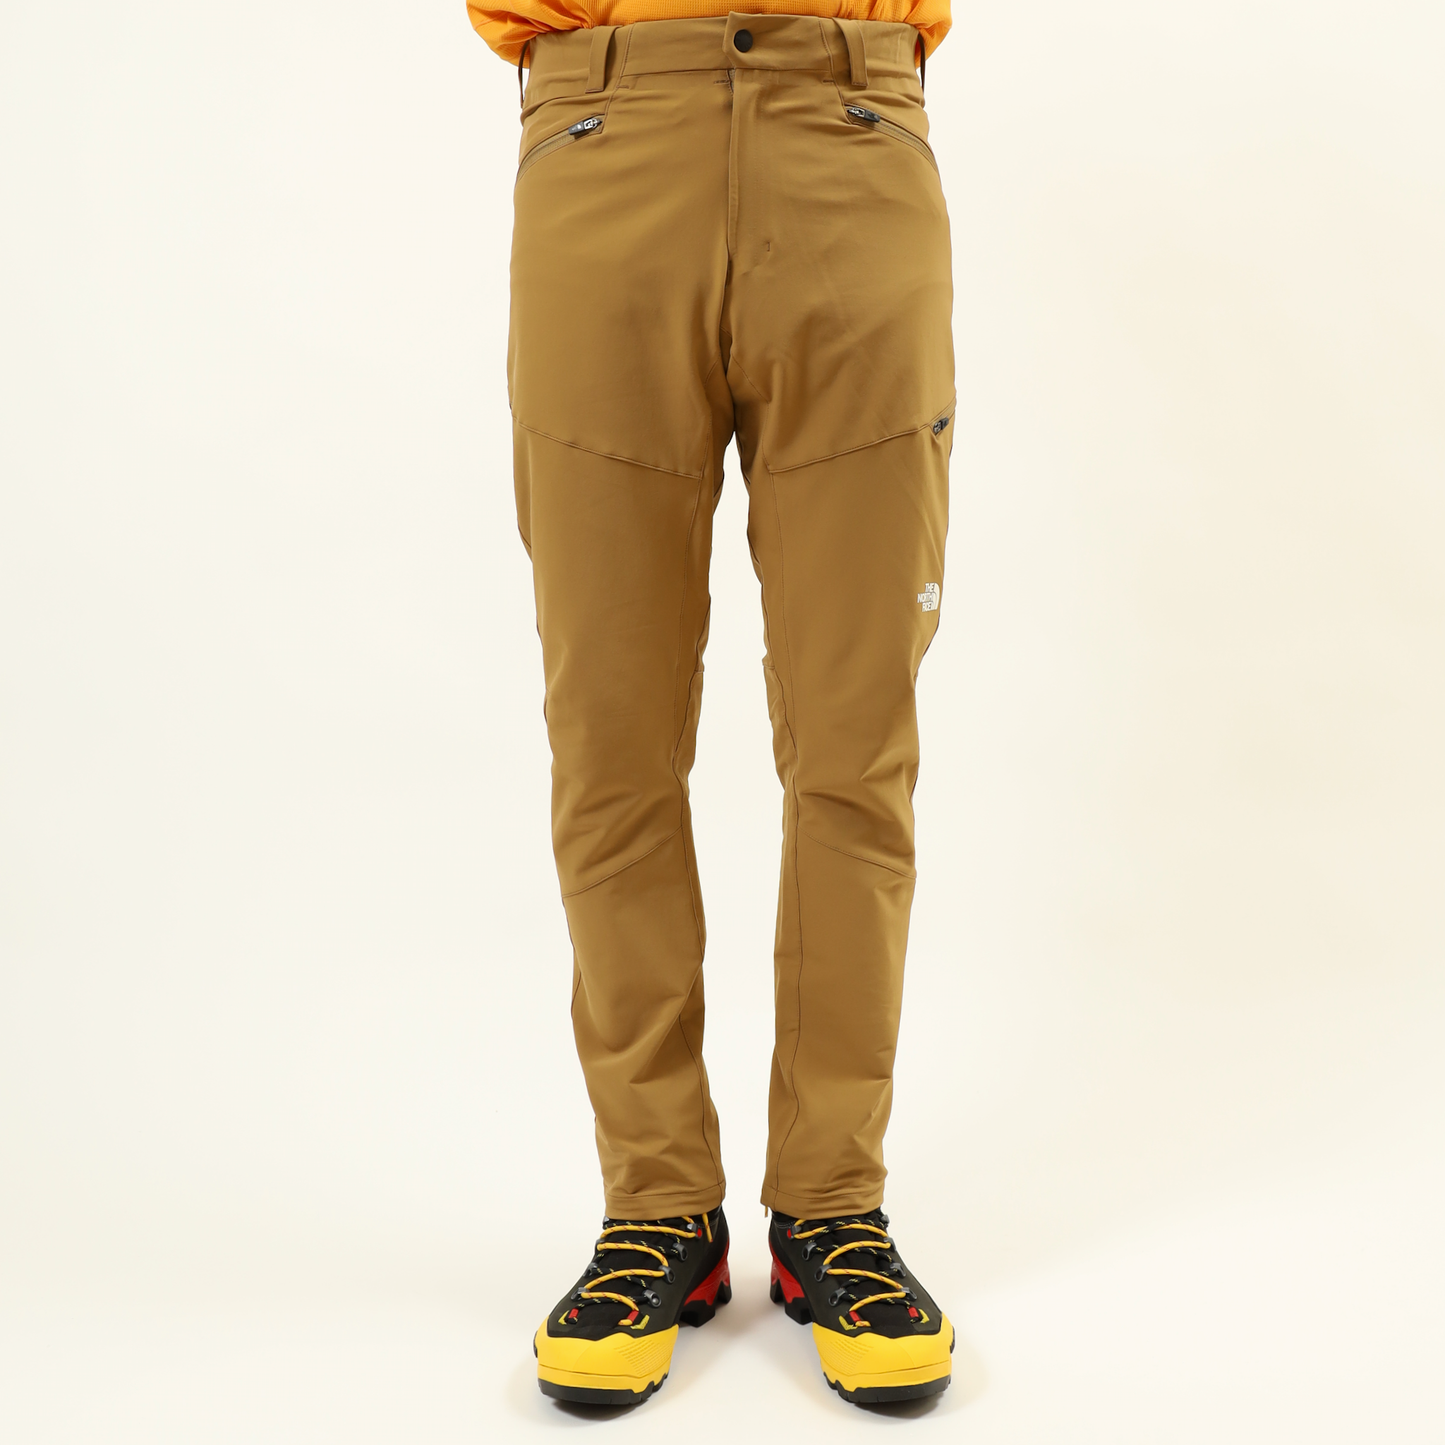 【THE NORTH FACE】Hammer Head Pant